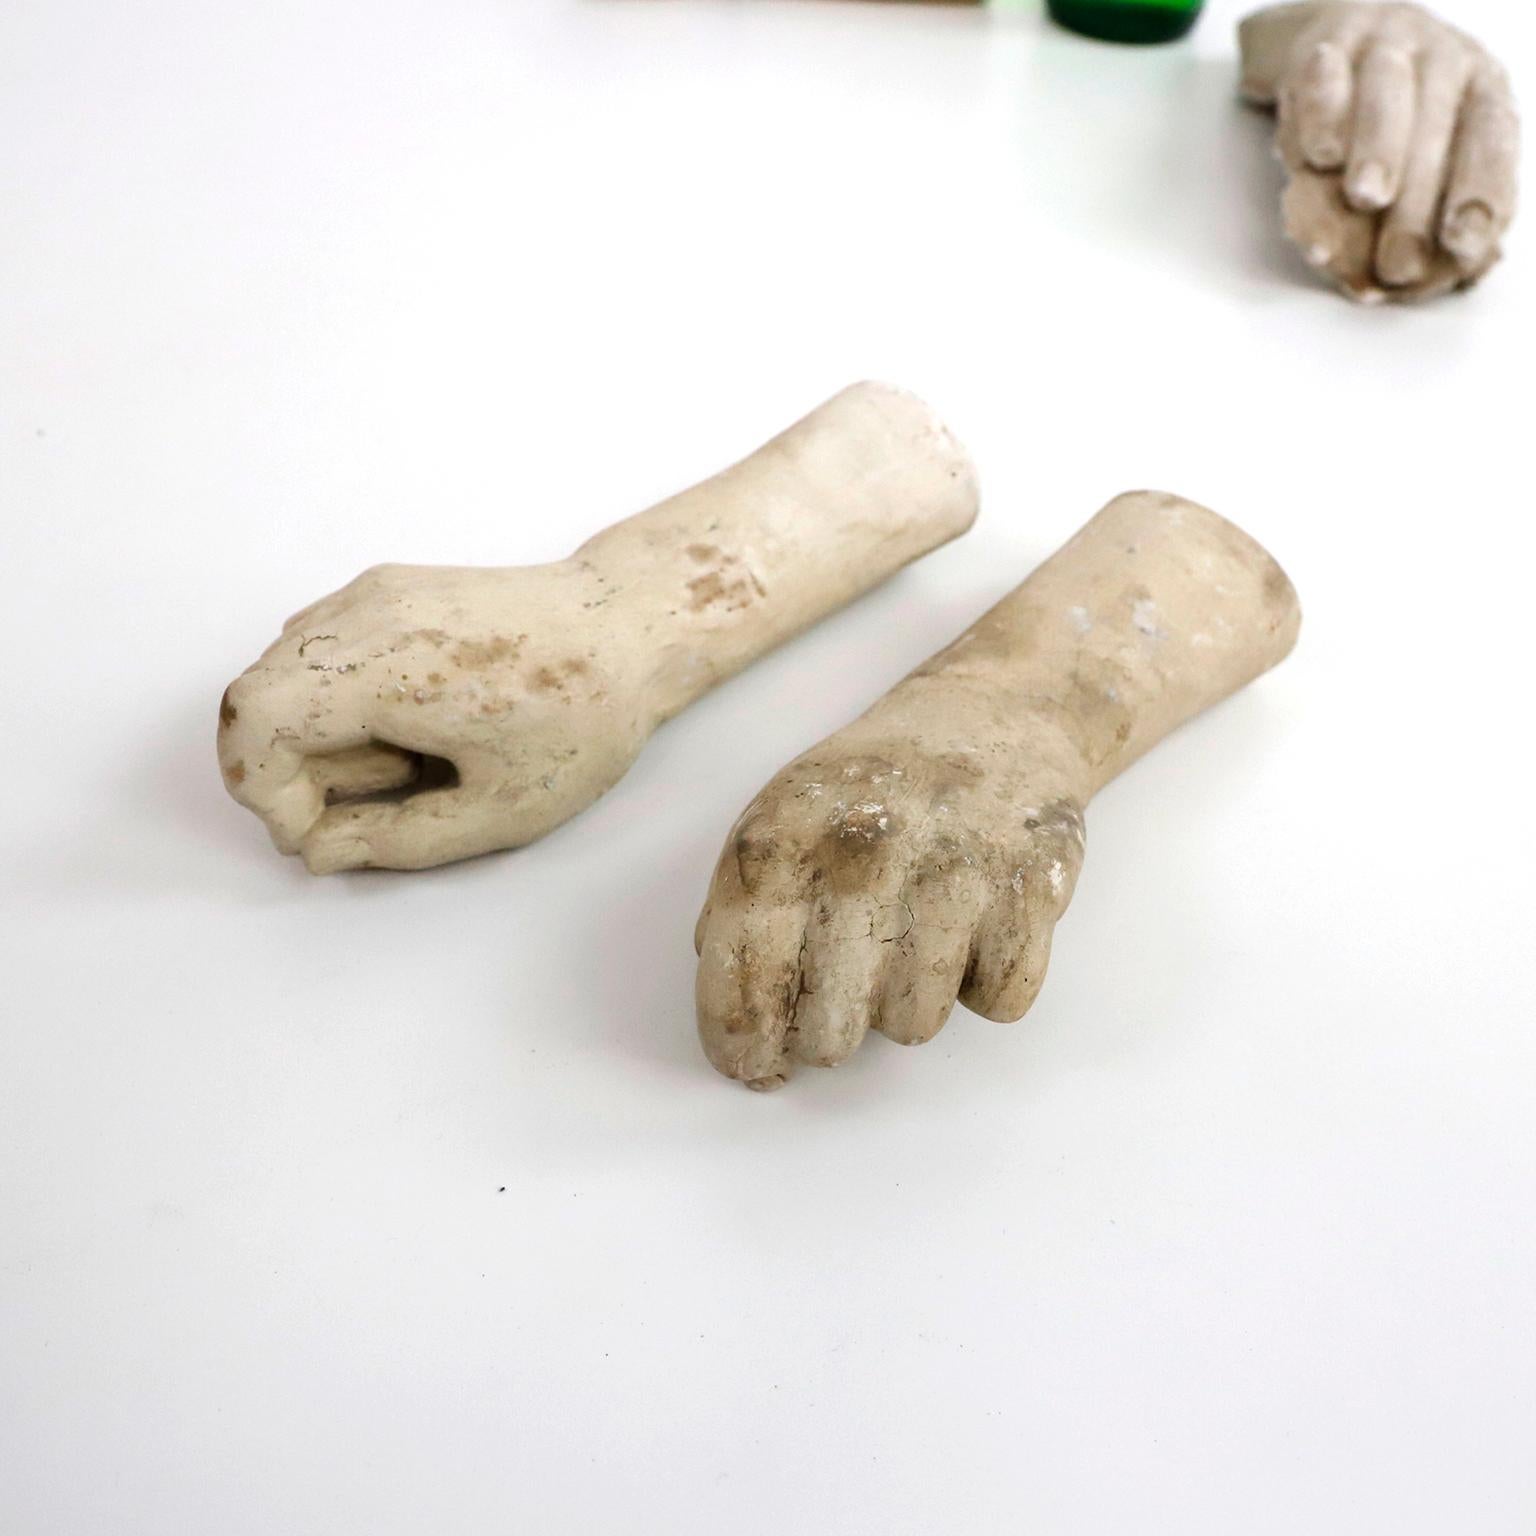 Circa 1900. We offer this fantastic Set of Study Hands Saint Sculptures. This set of pieces belonged to a sculptor of religious figures who used these models to create the christian saints.